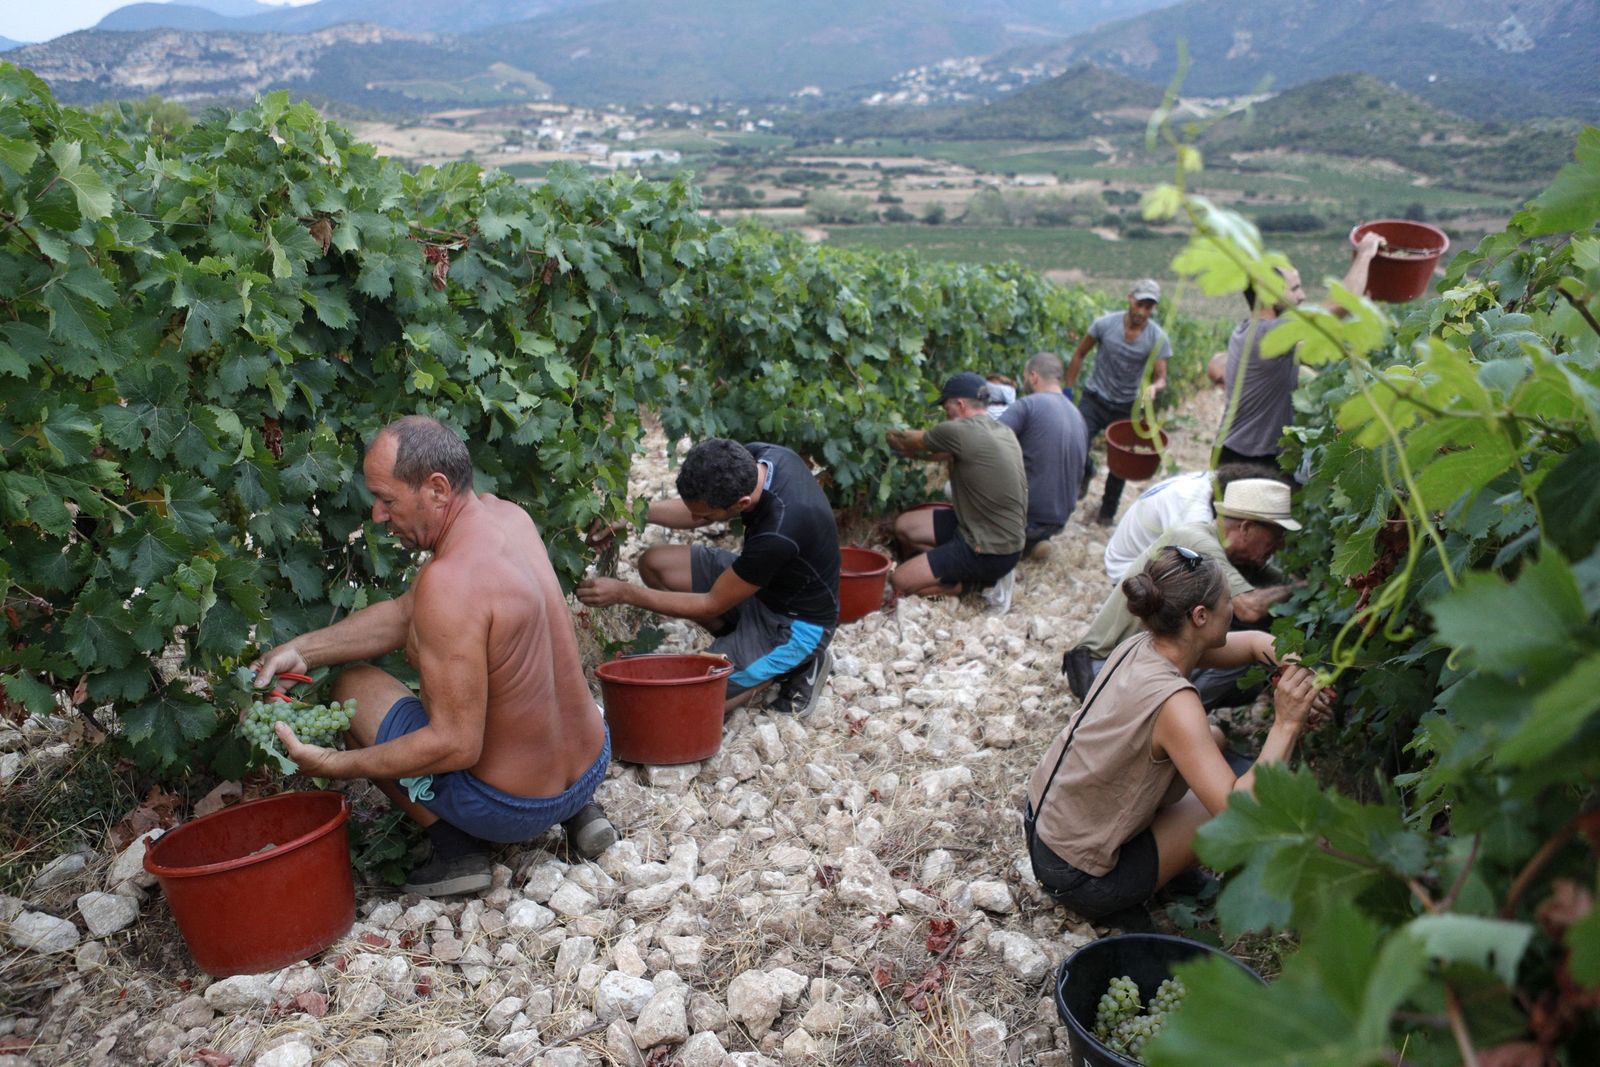 Workers harvest white grapes in a wineyard in Patrimonio on the French Mediterranean island of Corsica on August 12, 2022. - The grape harvest season has begun a few weeks earlier this year due to a heat wave and drought on Corsica. (Photo by PASCAL POCHARD-CASABIANCA / AFP) - AFP